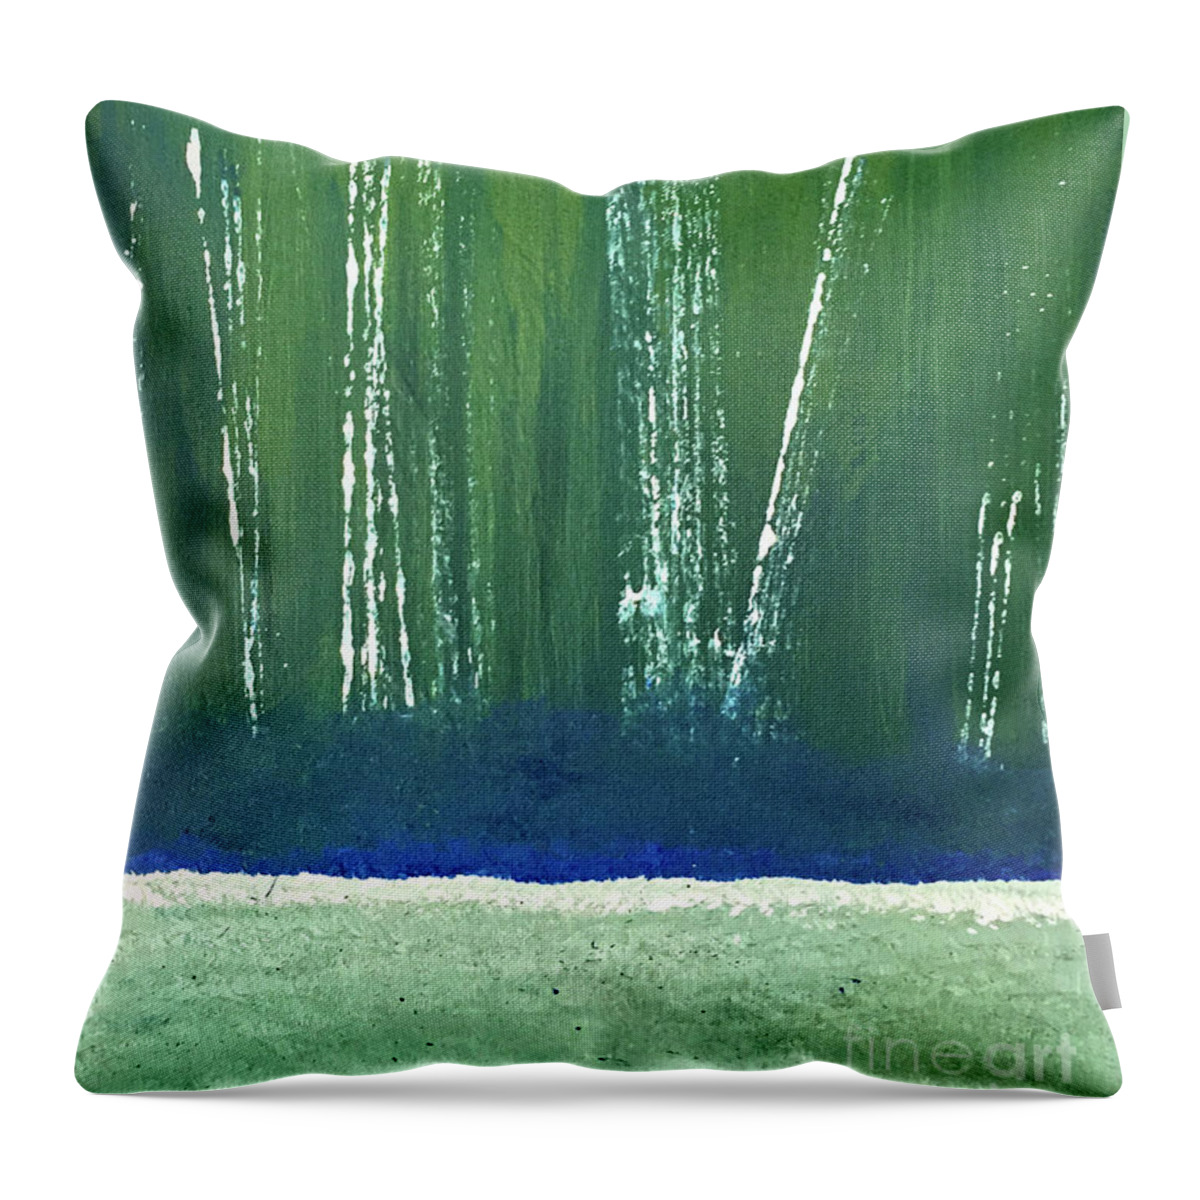 Water Throw Pillow featuring the painting Under The Sea by Amanda Sheil